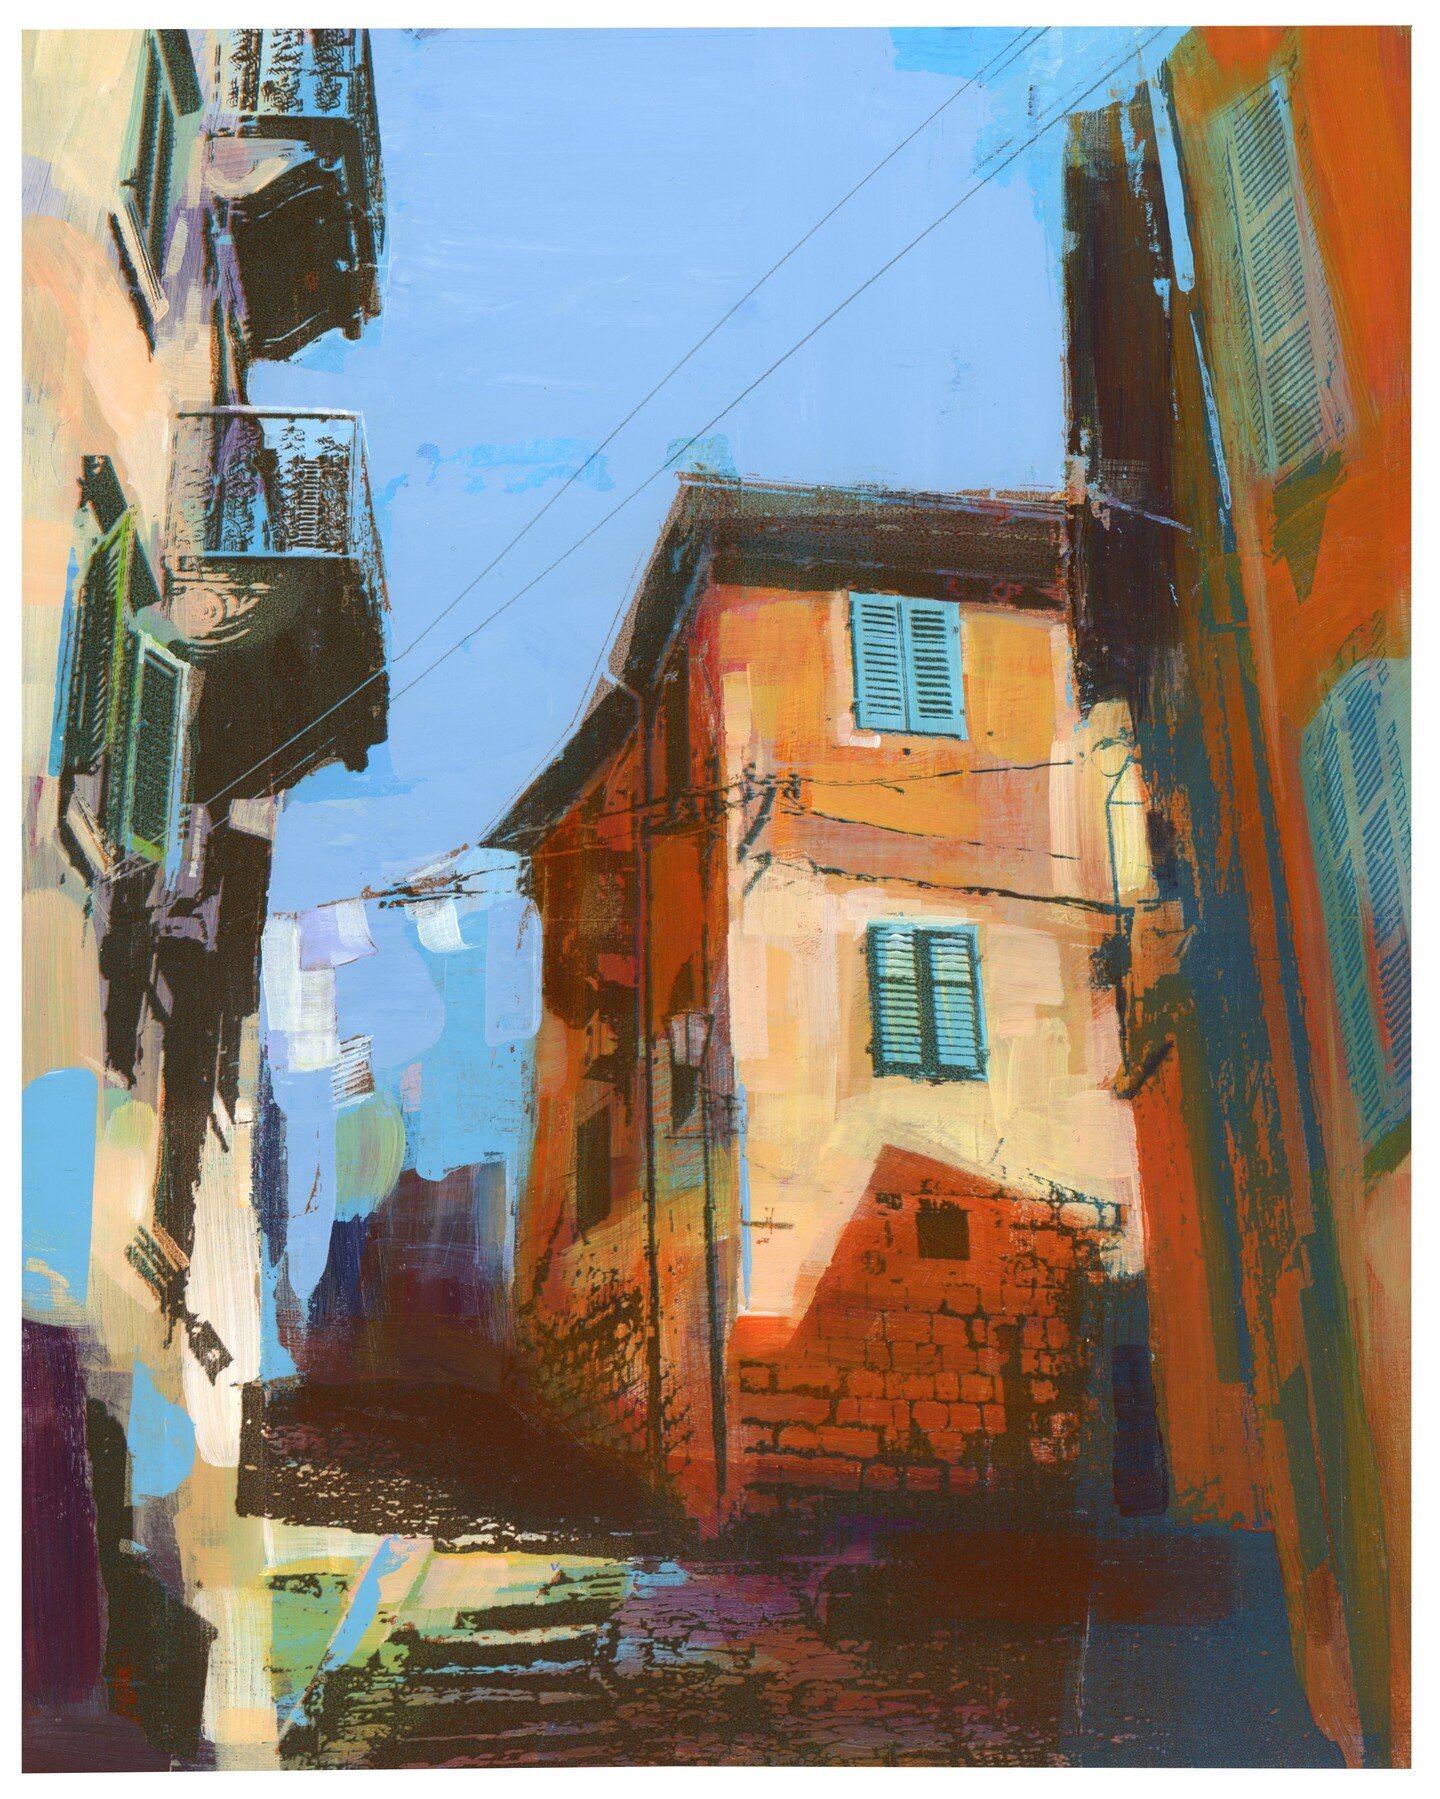 Streets of Kotor, Acrylic and screen print on wooden panel, 30cm x 38cm or available as a print
#acrylicpainting #artwork #colour #travel #print #Montenegro